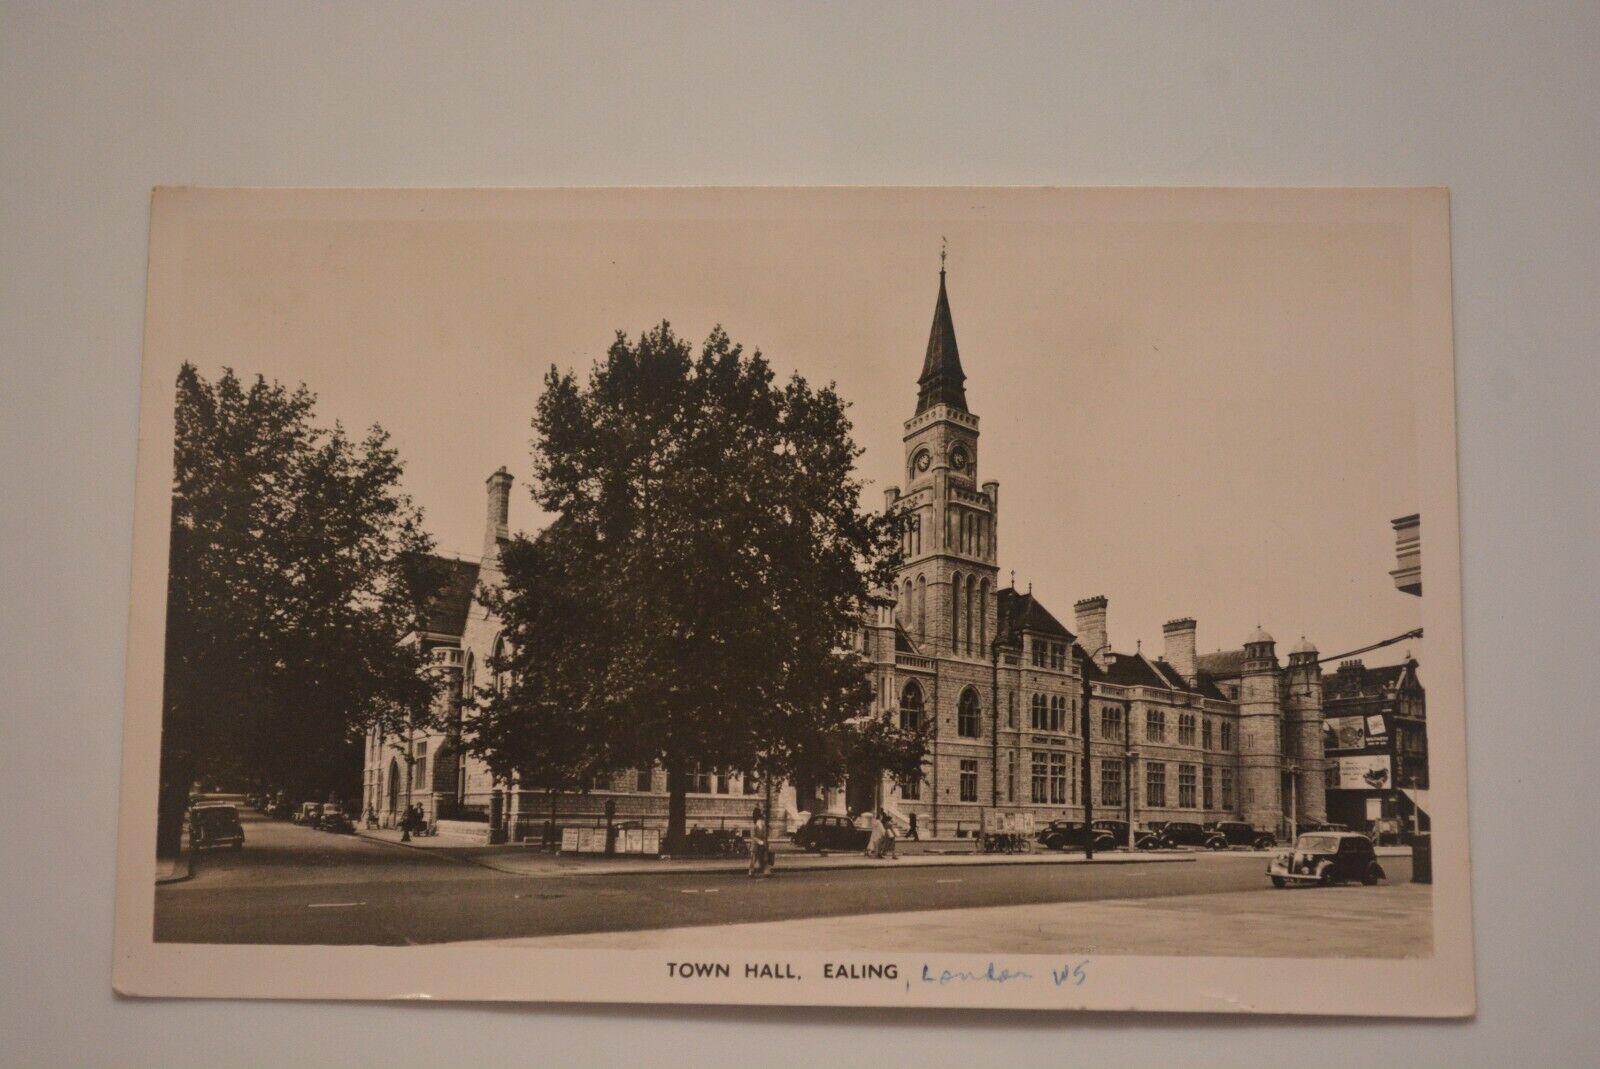 Town Hall in Ealing, West London Postcard (POSTED)